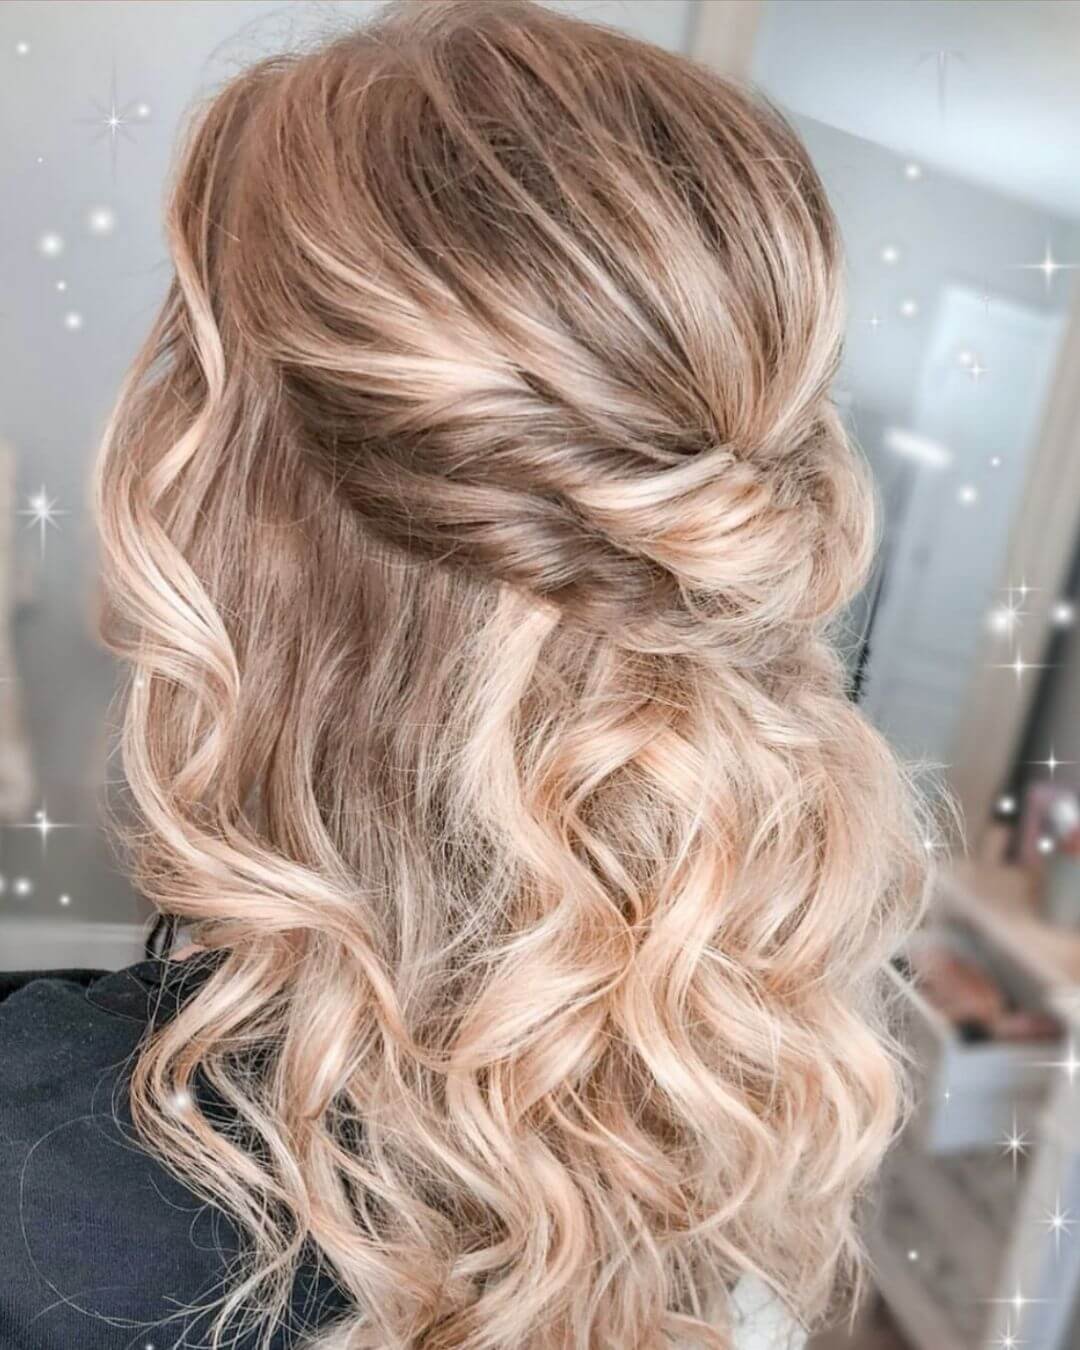 Christmas Inspired Hairstyles and Colors Pink Blonde Curly Double Twist Half Up